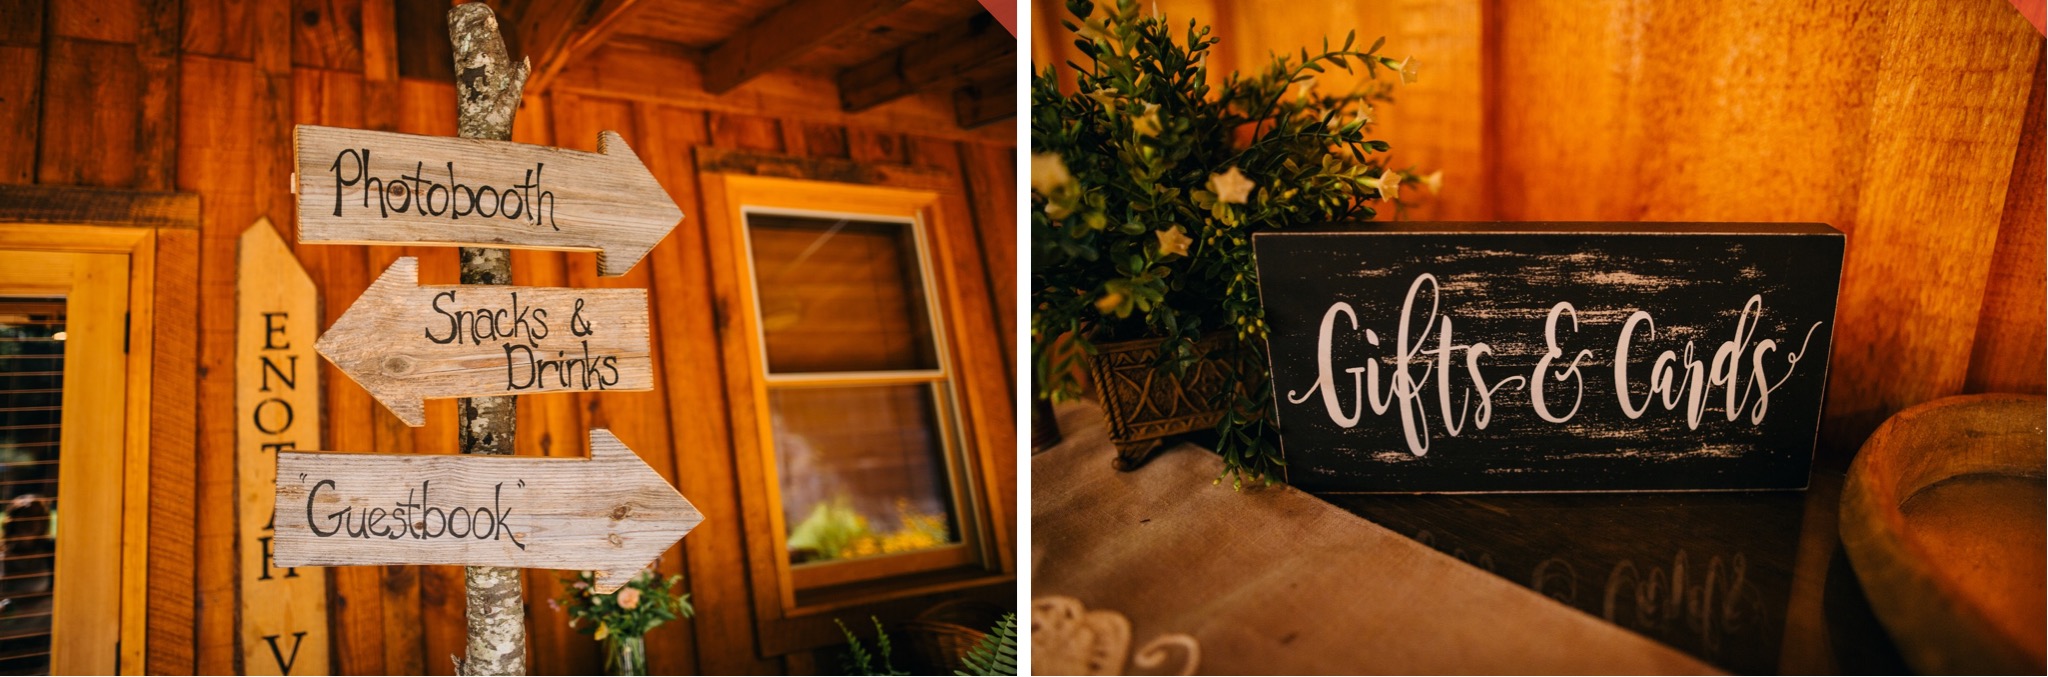 The Gifts and Cards sign at a wedding reception.